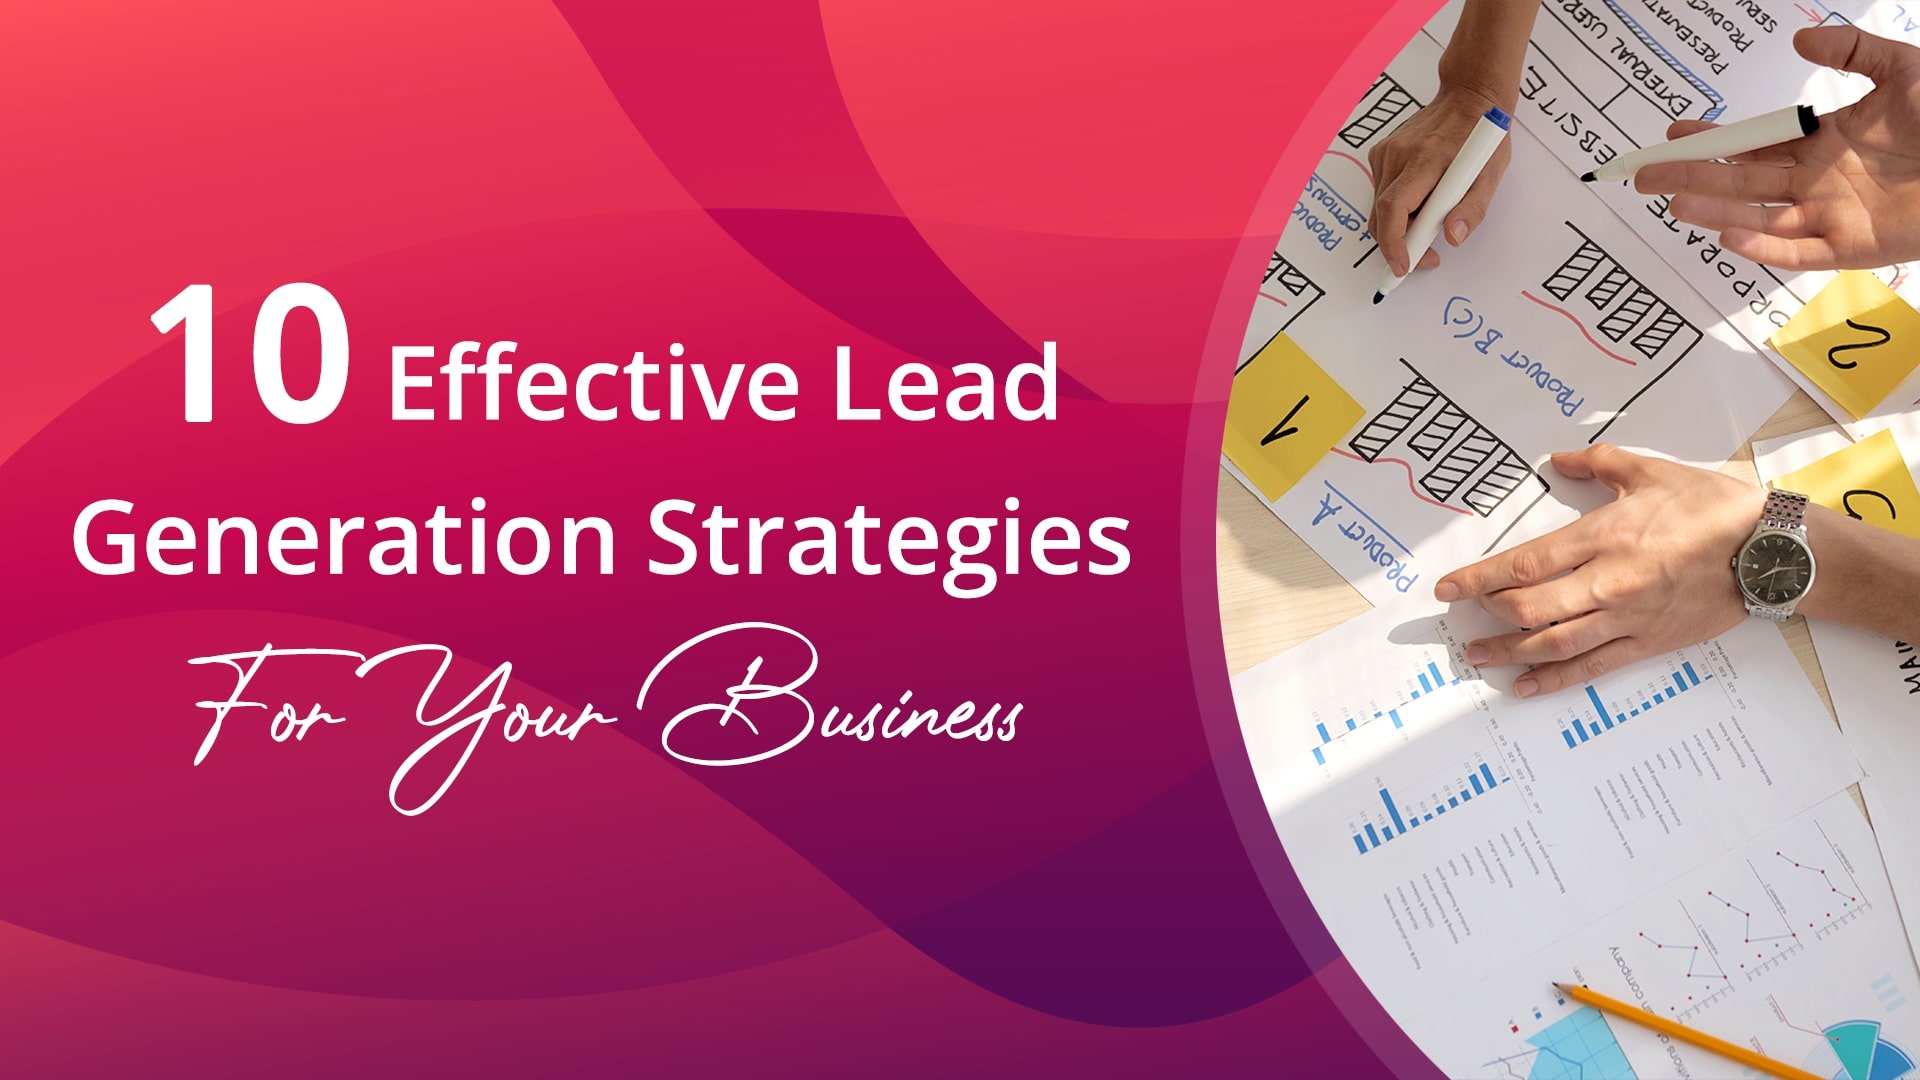 10 Effective Lead Generation Strategies For Your Business